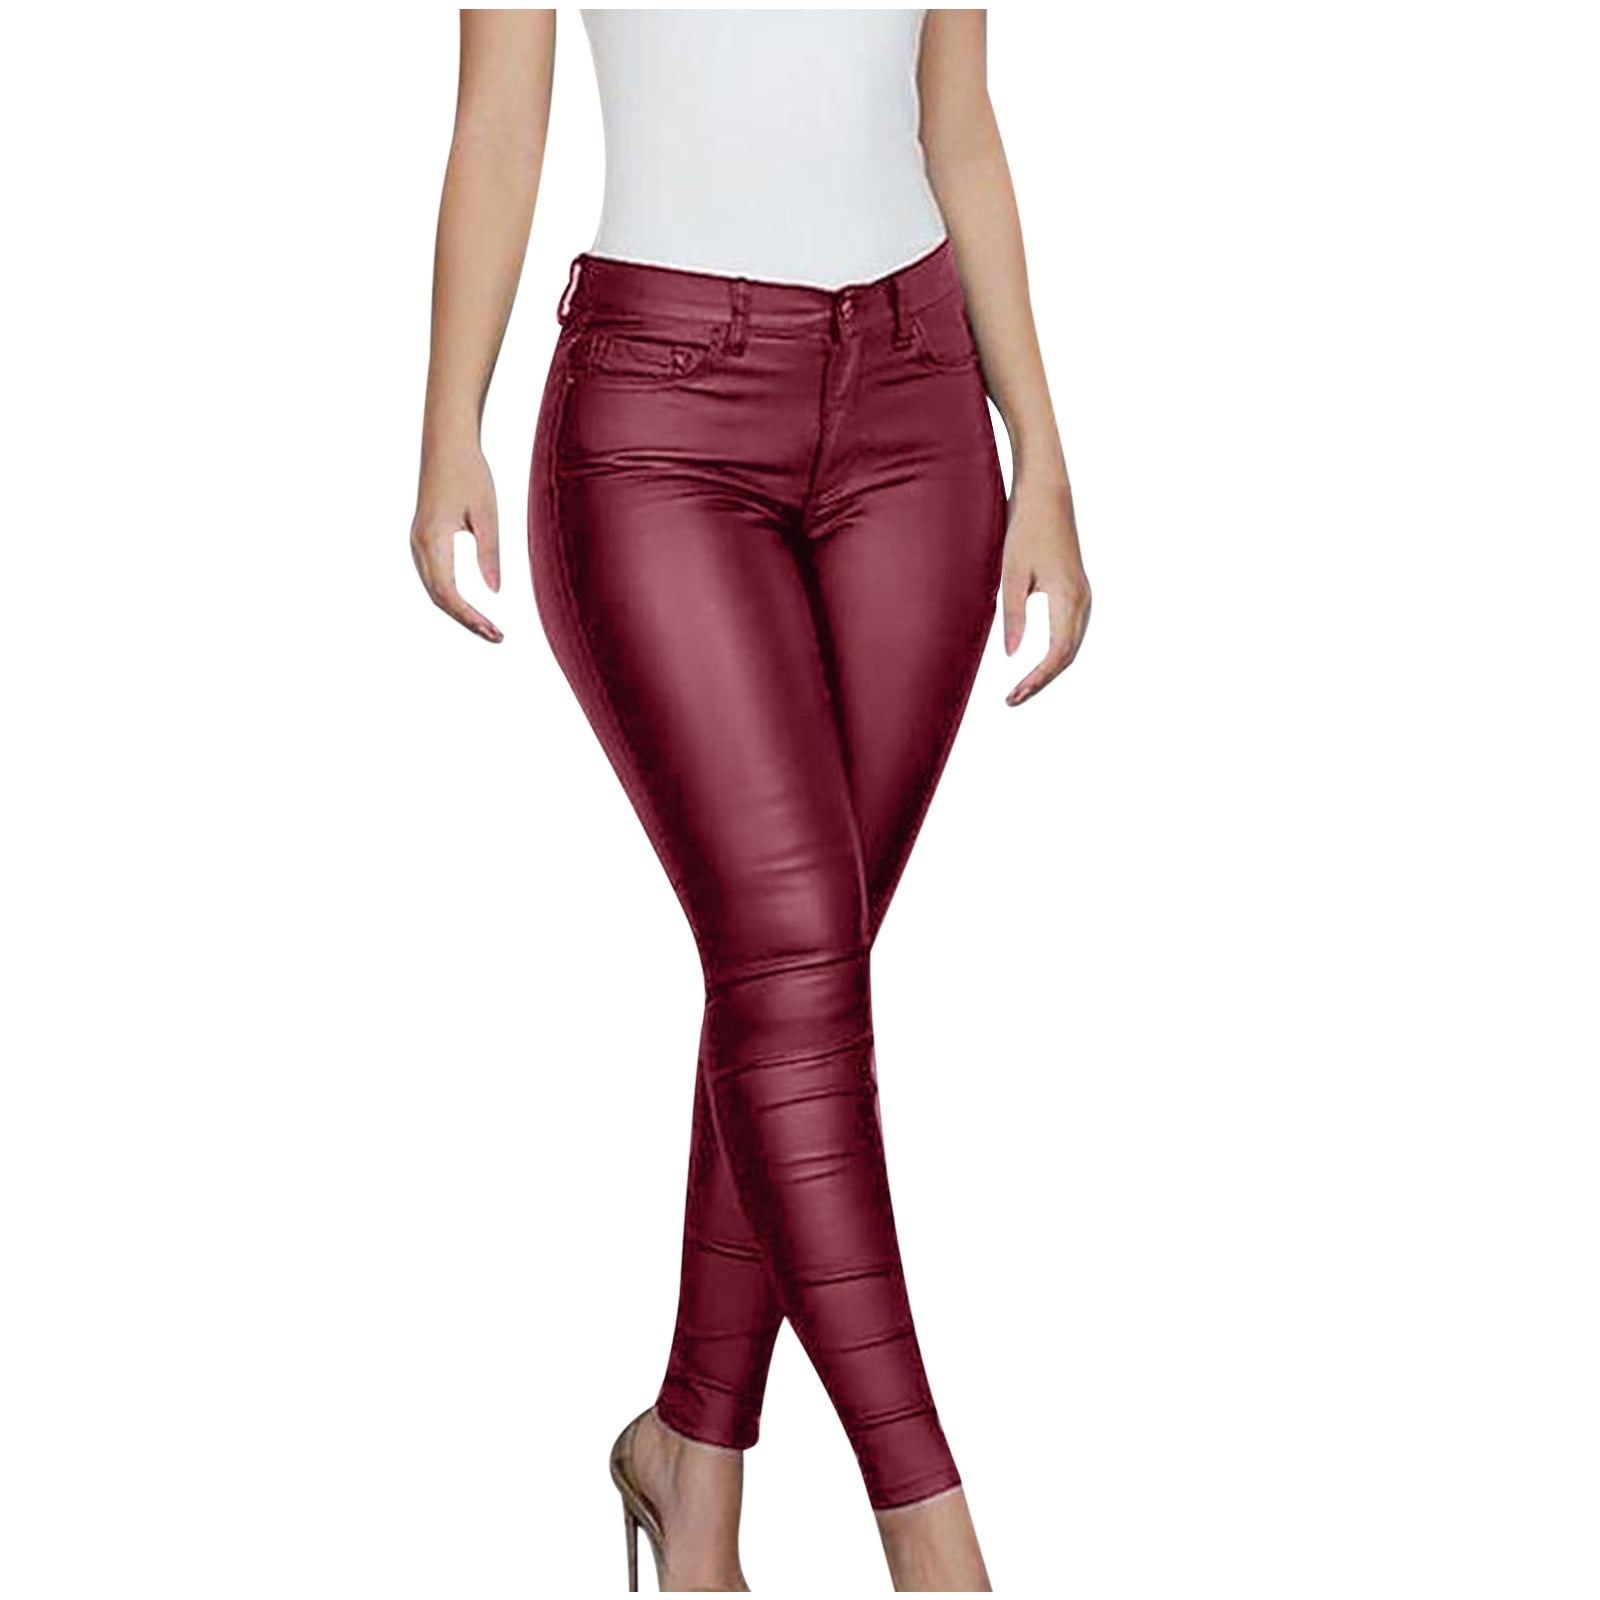 YYDGH Women's Faux Leather Skinny Pants Button Front High Waisted